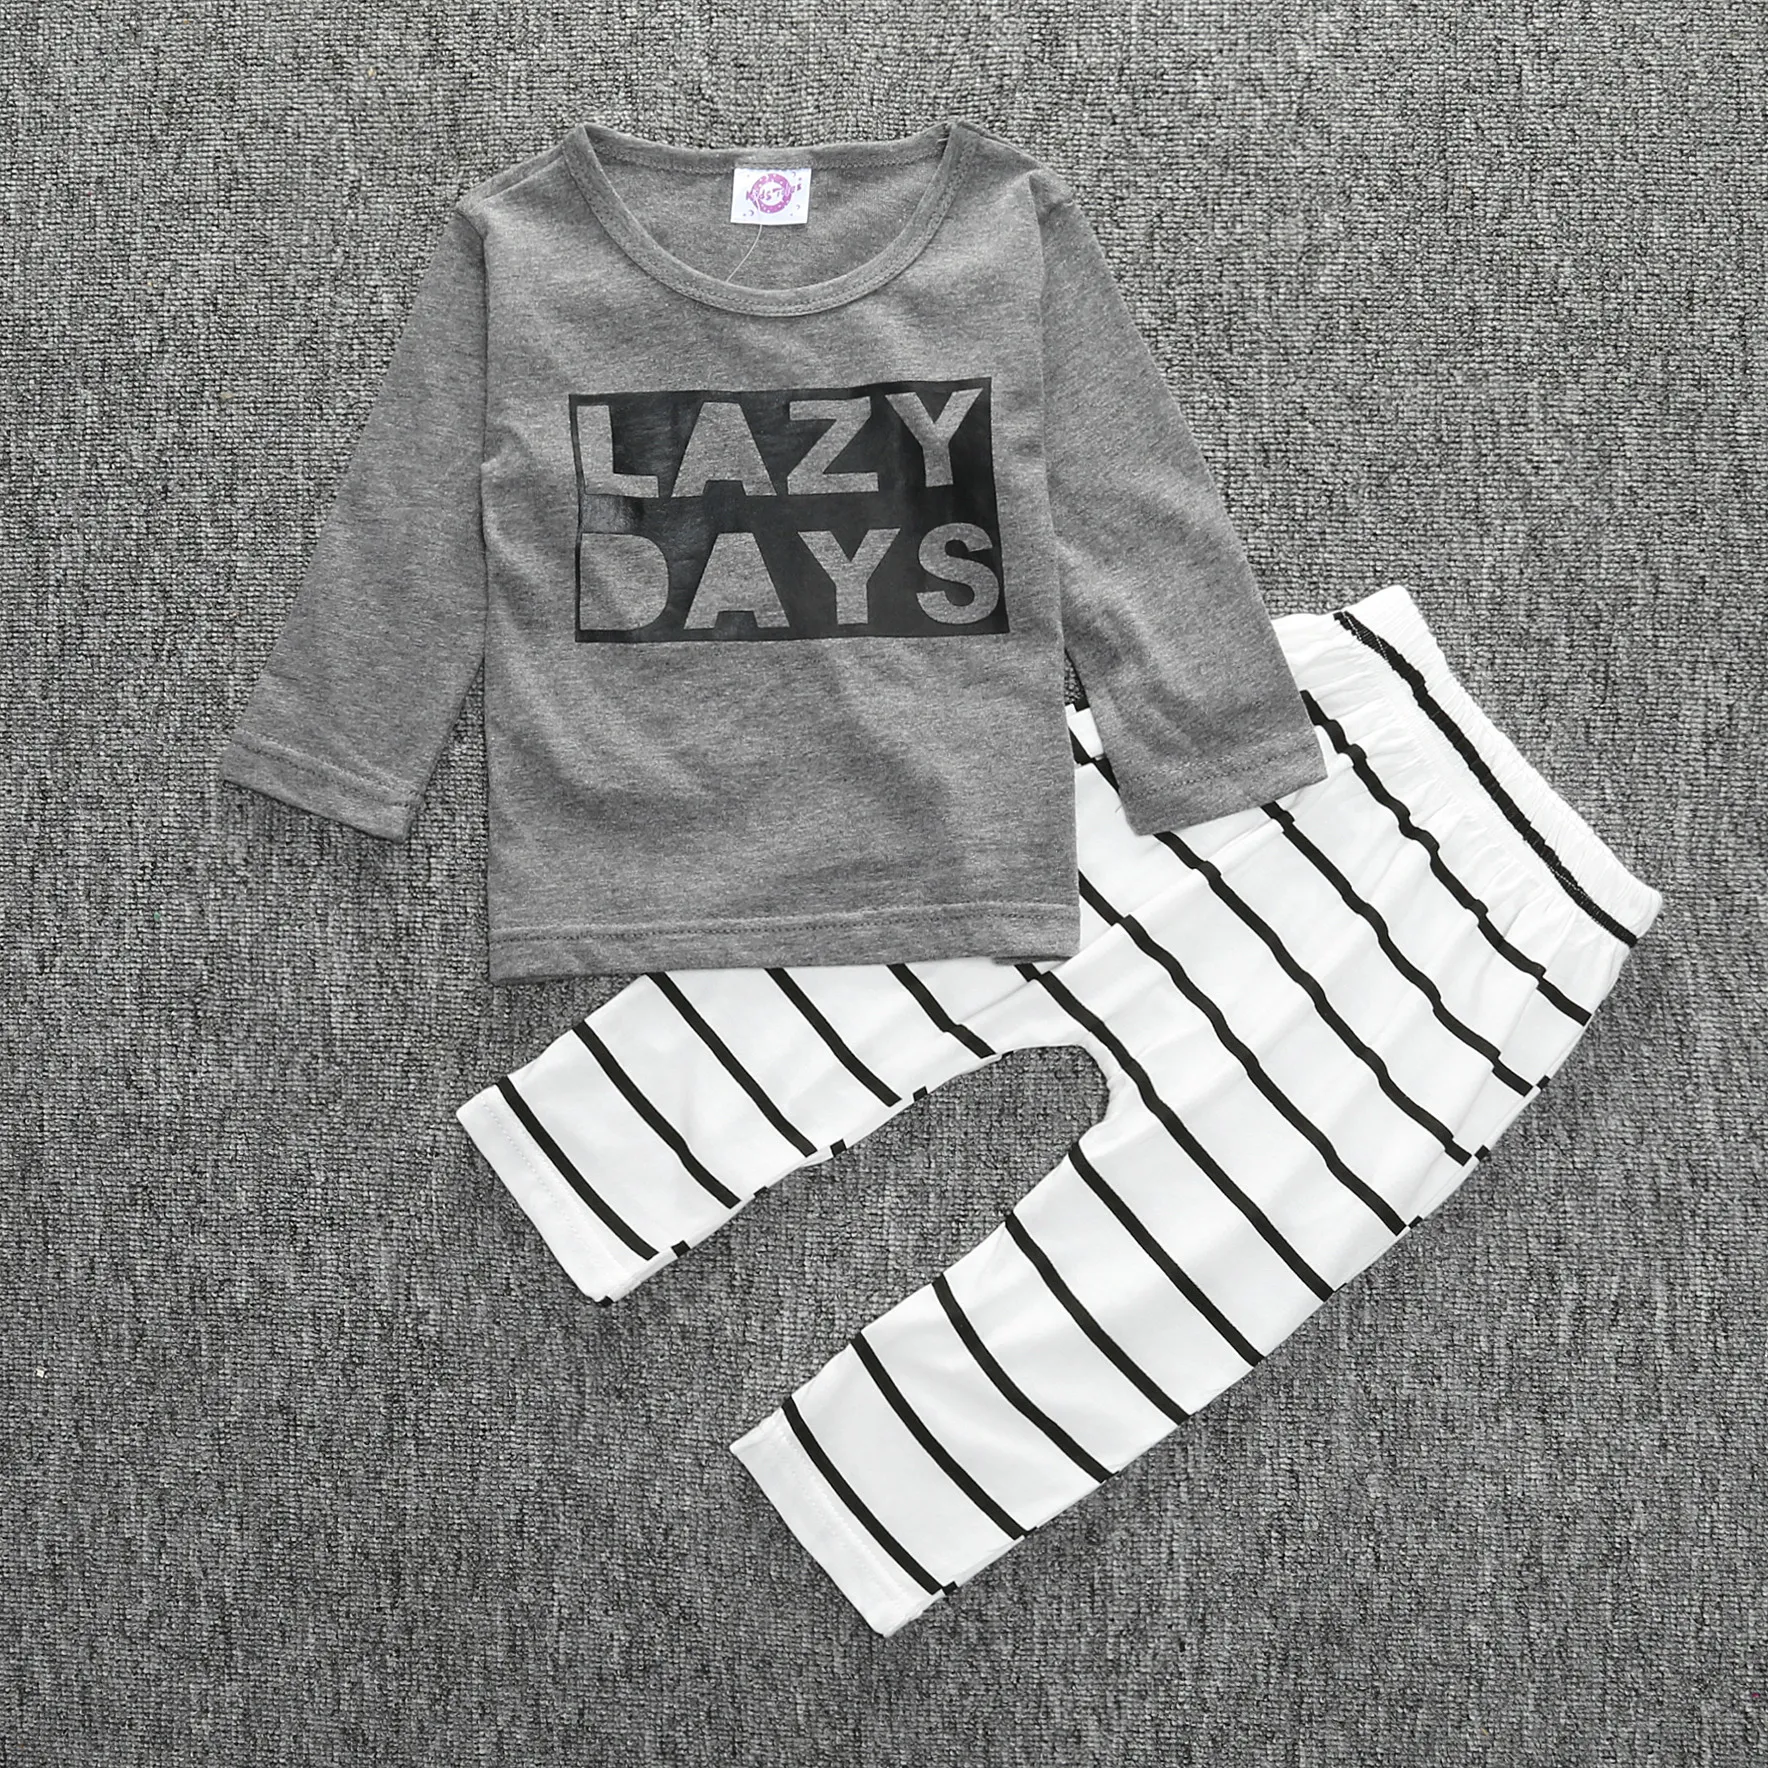 Toddler Clothing sets LAZY DAYS 2 Pieces Gray Top Striped Pants Baby Boys Clothes Set Kids Outfits